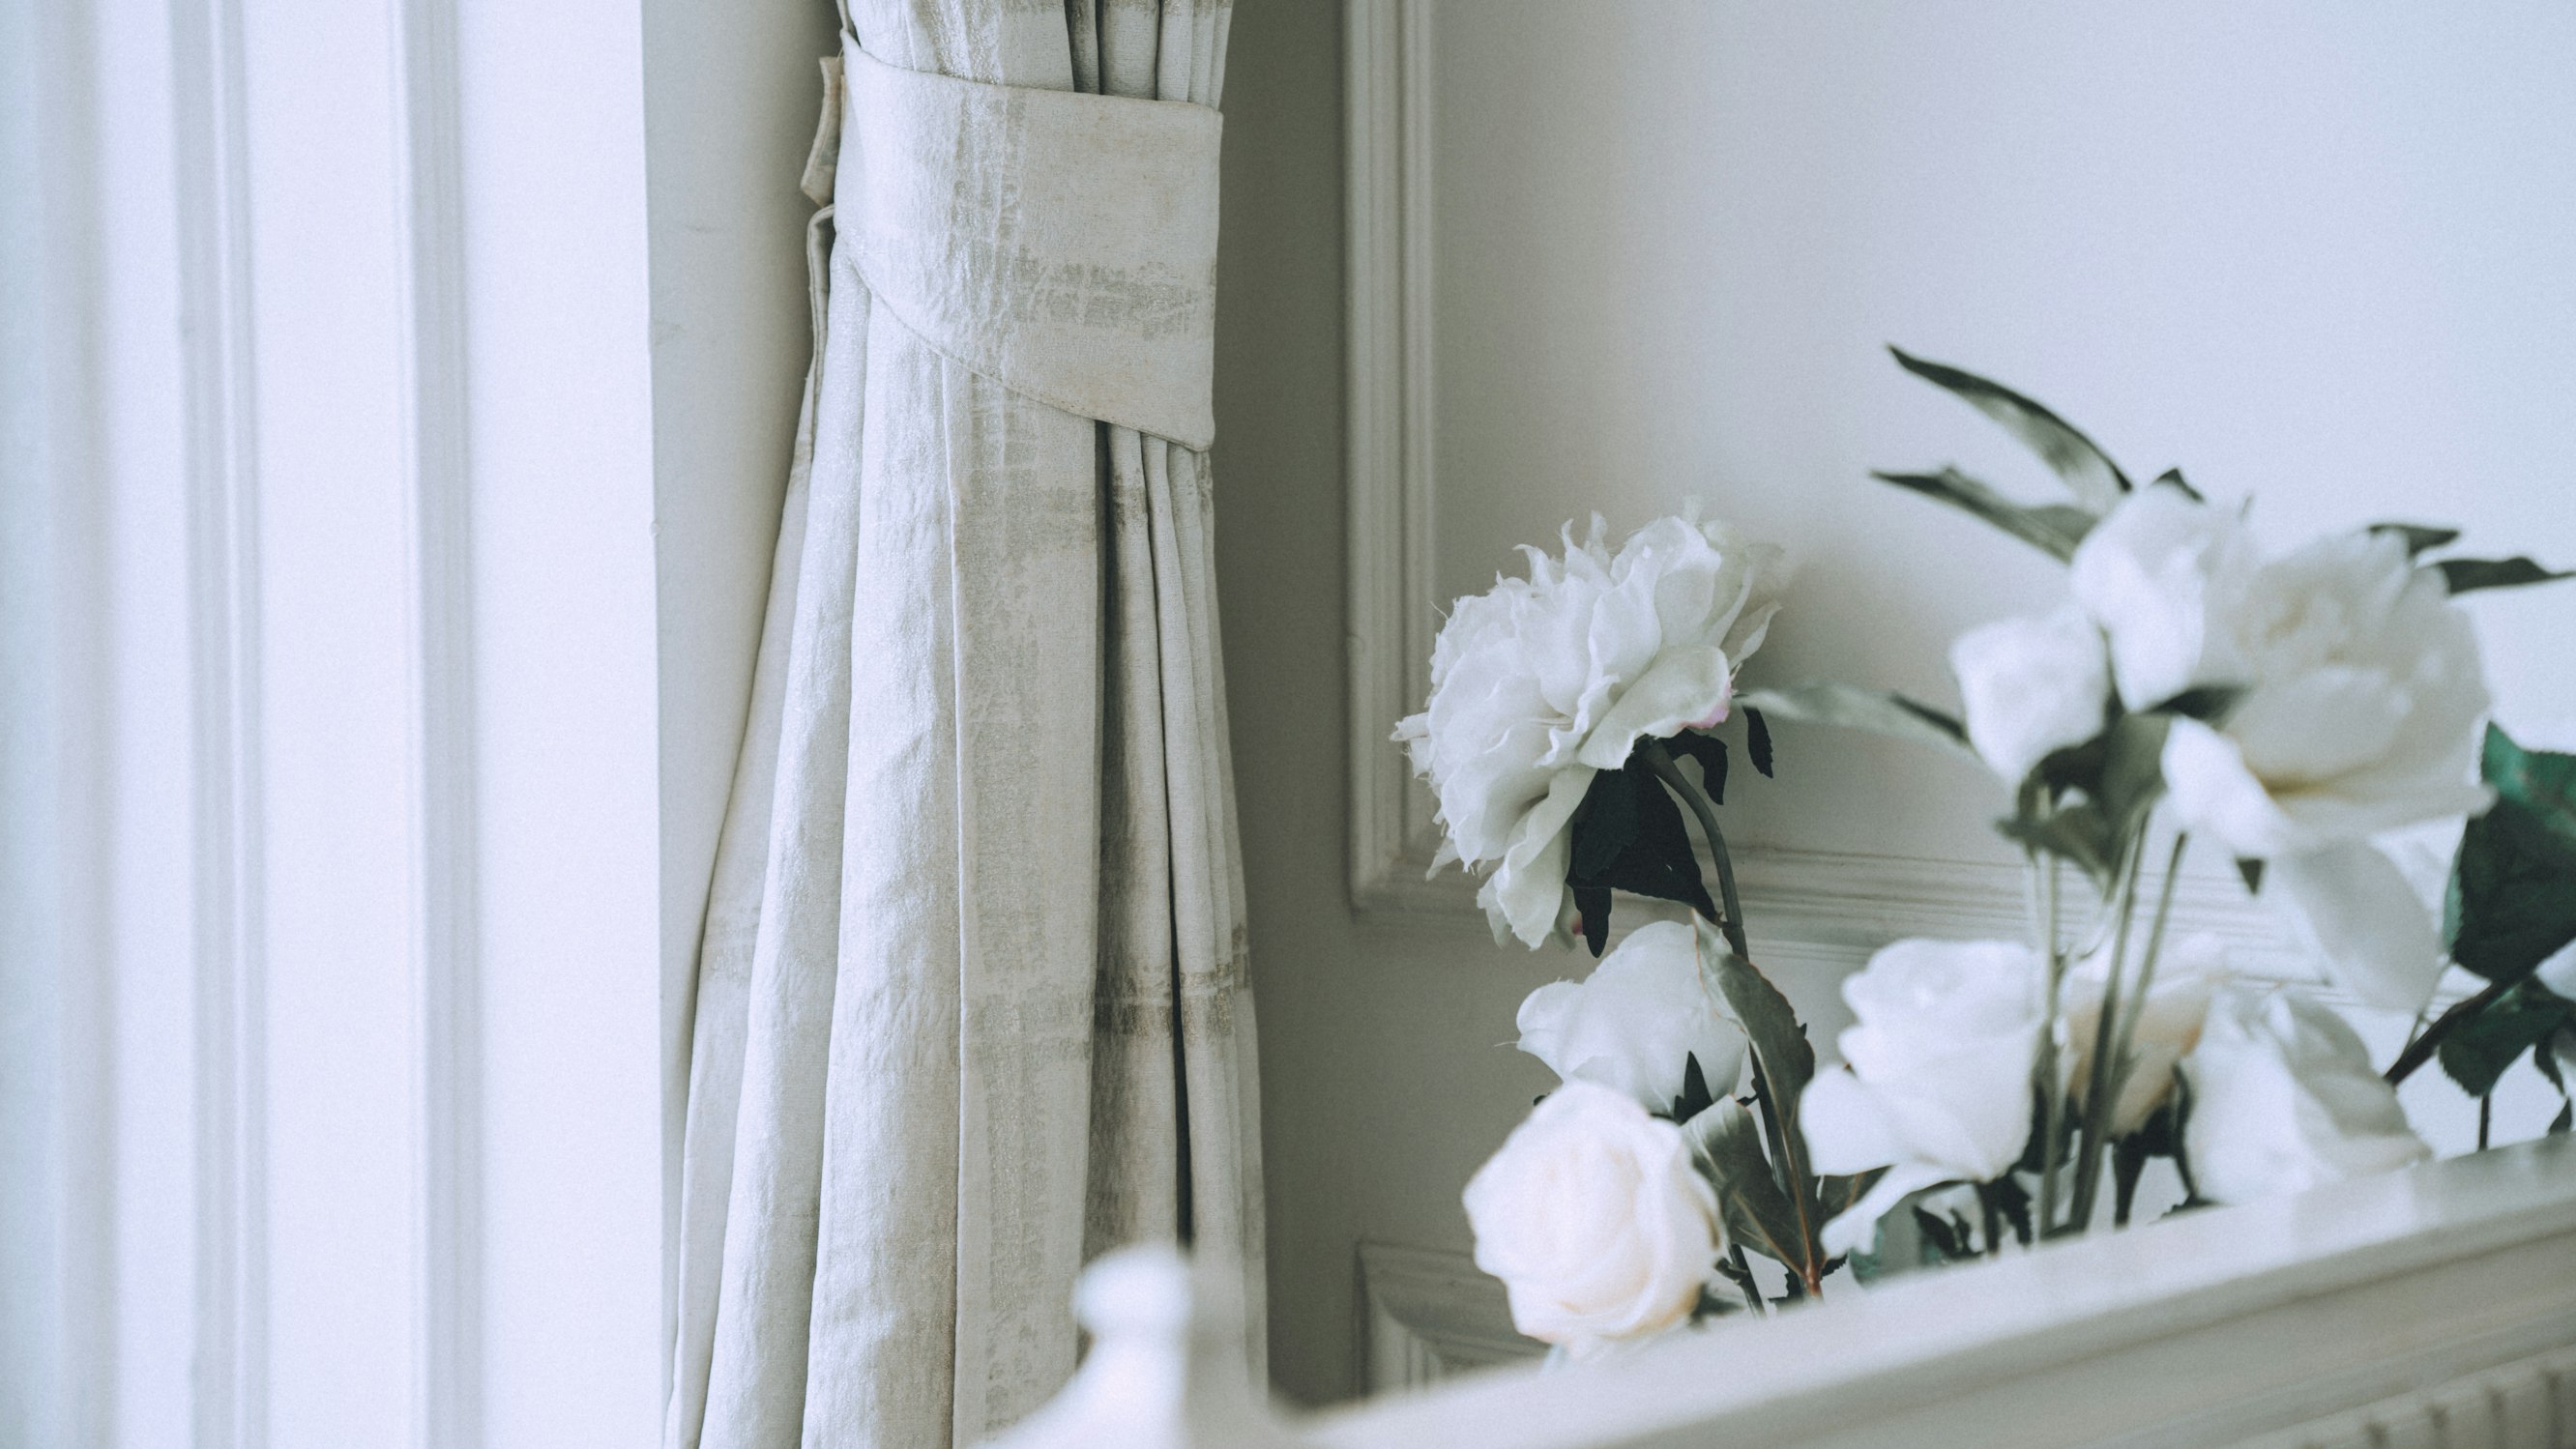 White blackout curtains by window and flowers - Photo by Arun Sharma on Unsplash